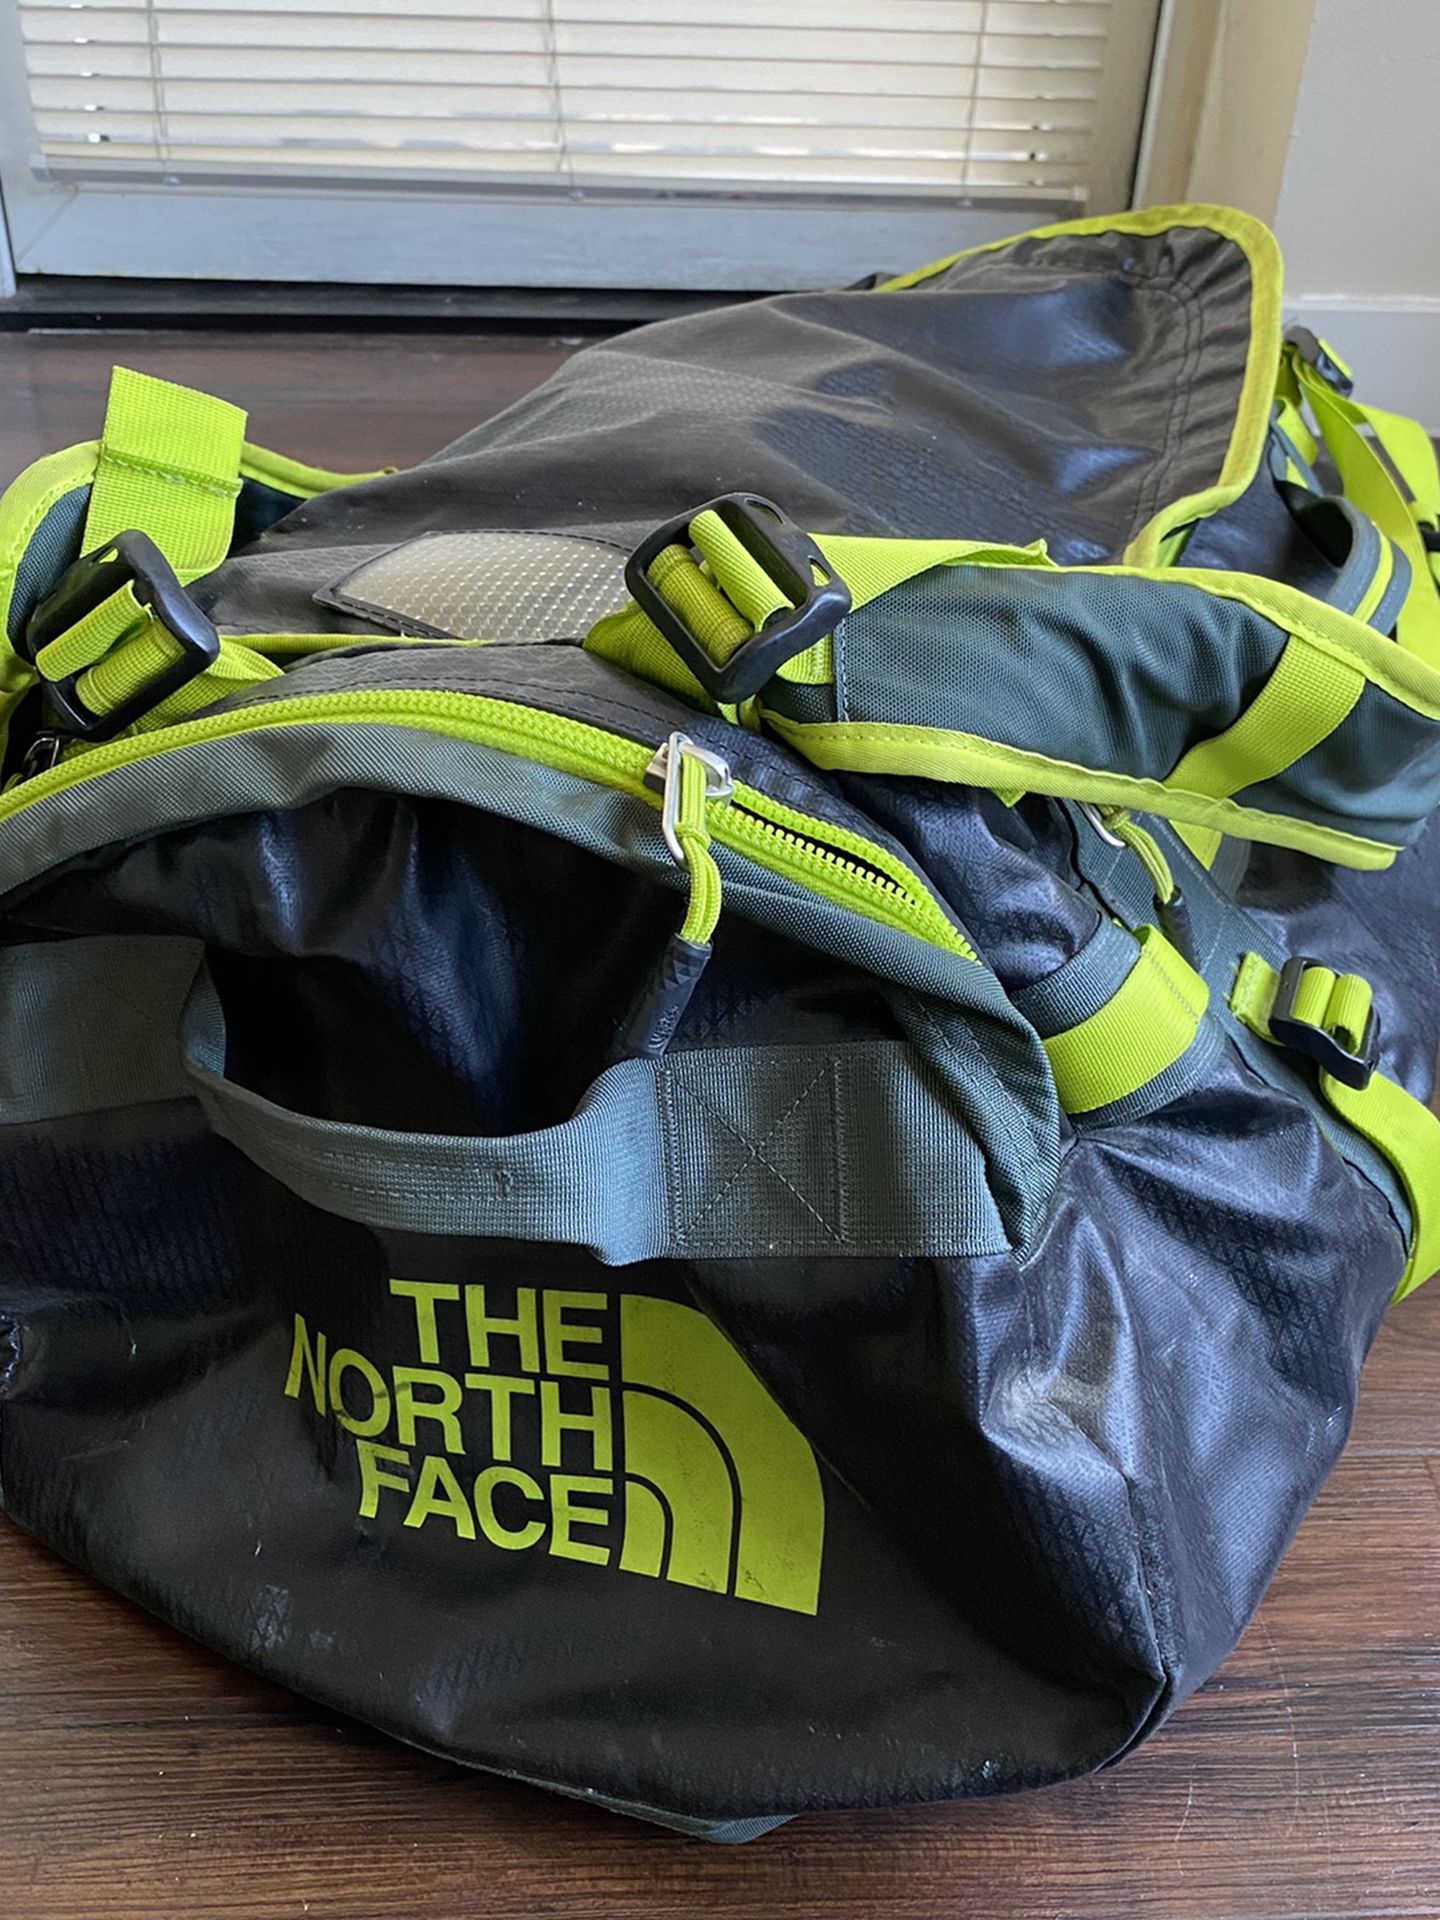 The North Face Duffle Bag - Large